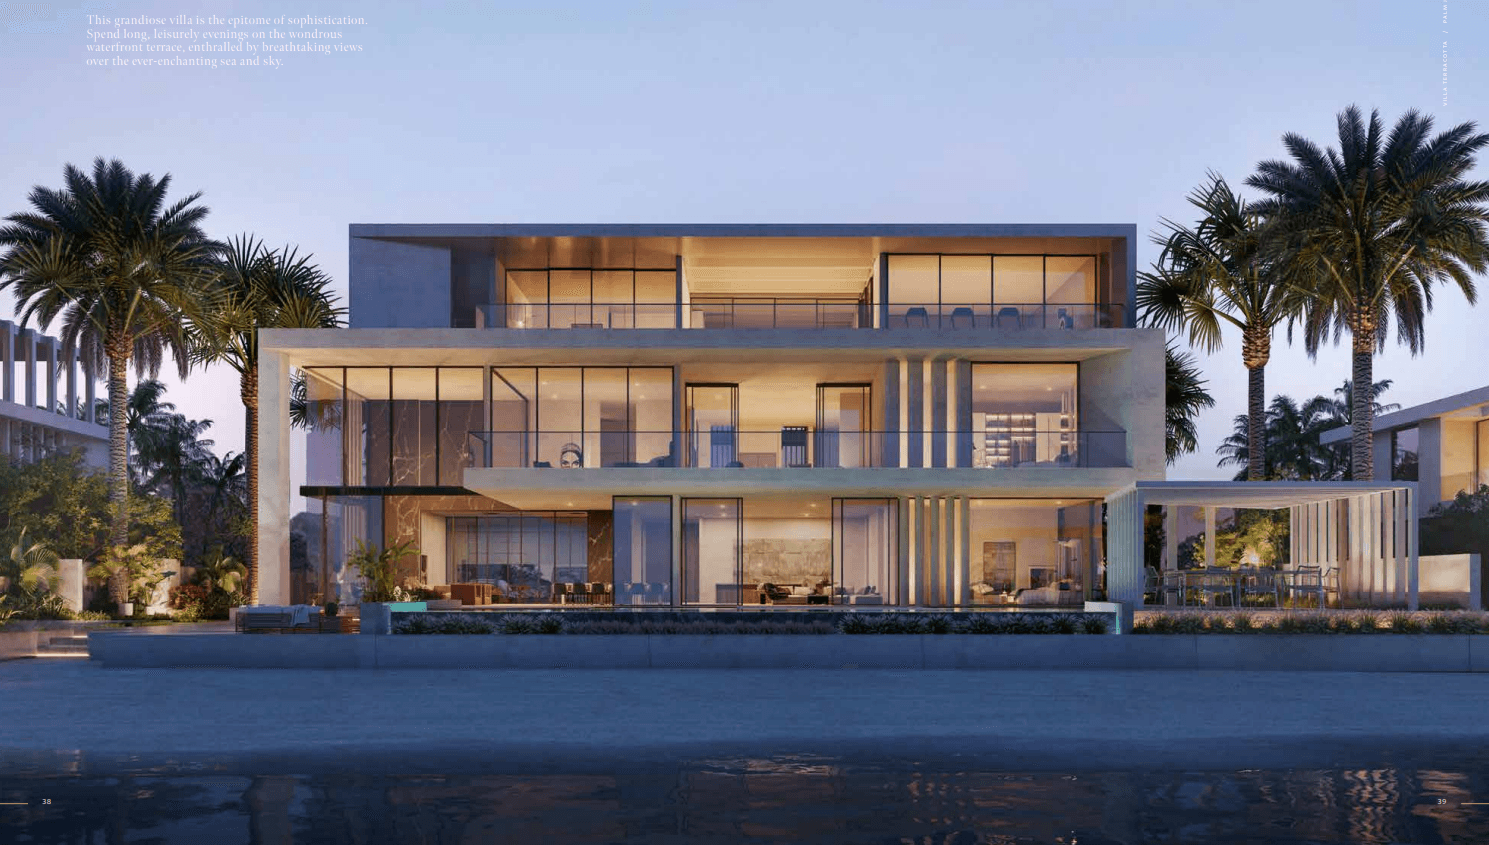 7-BEDROOM CORAL VILLAS AT PALM JEBEL ALI – NAKHEEL'S NEW ICON, SIGNATURE LUXURY RESIDENCES WITH OFFICE, SHOW GARAGE, AND BREATHTAKING PANORAMIC VIEWS